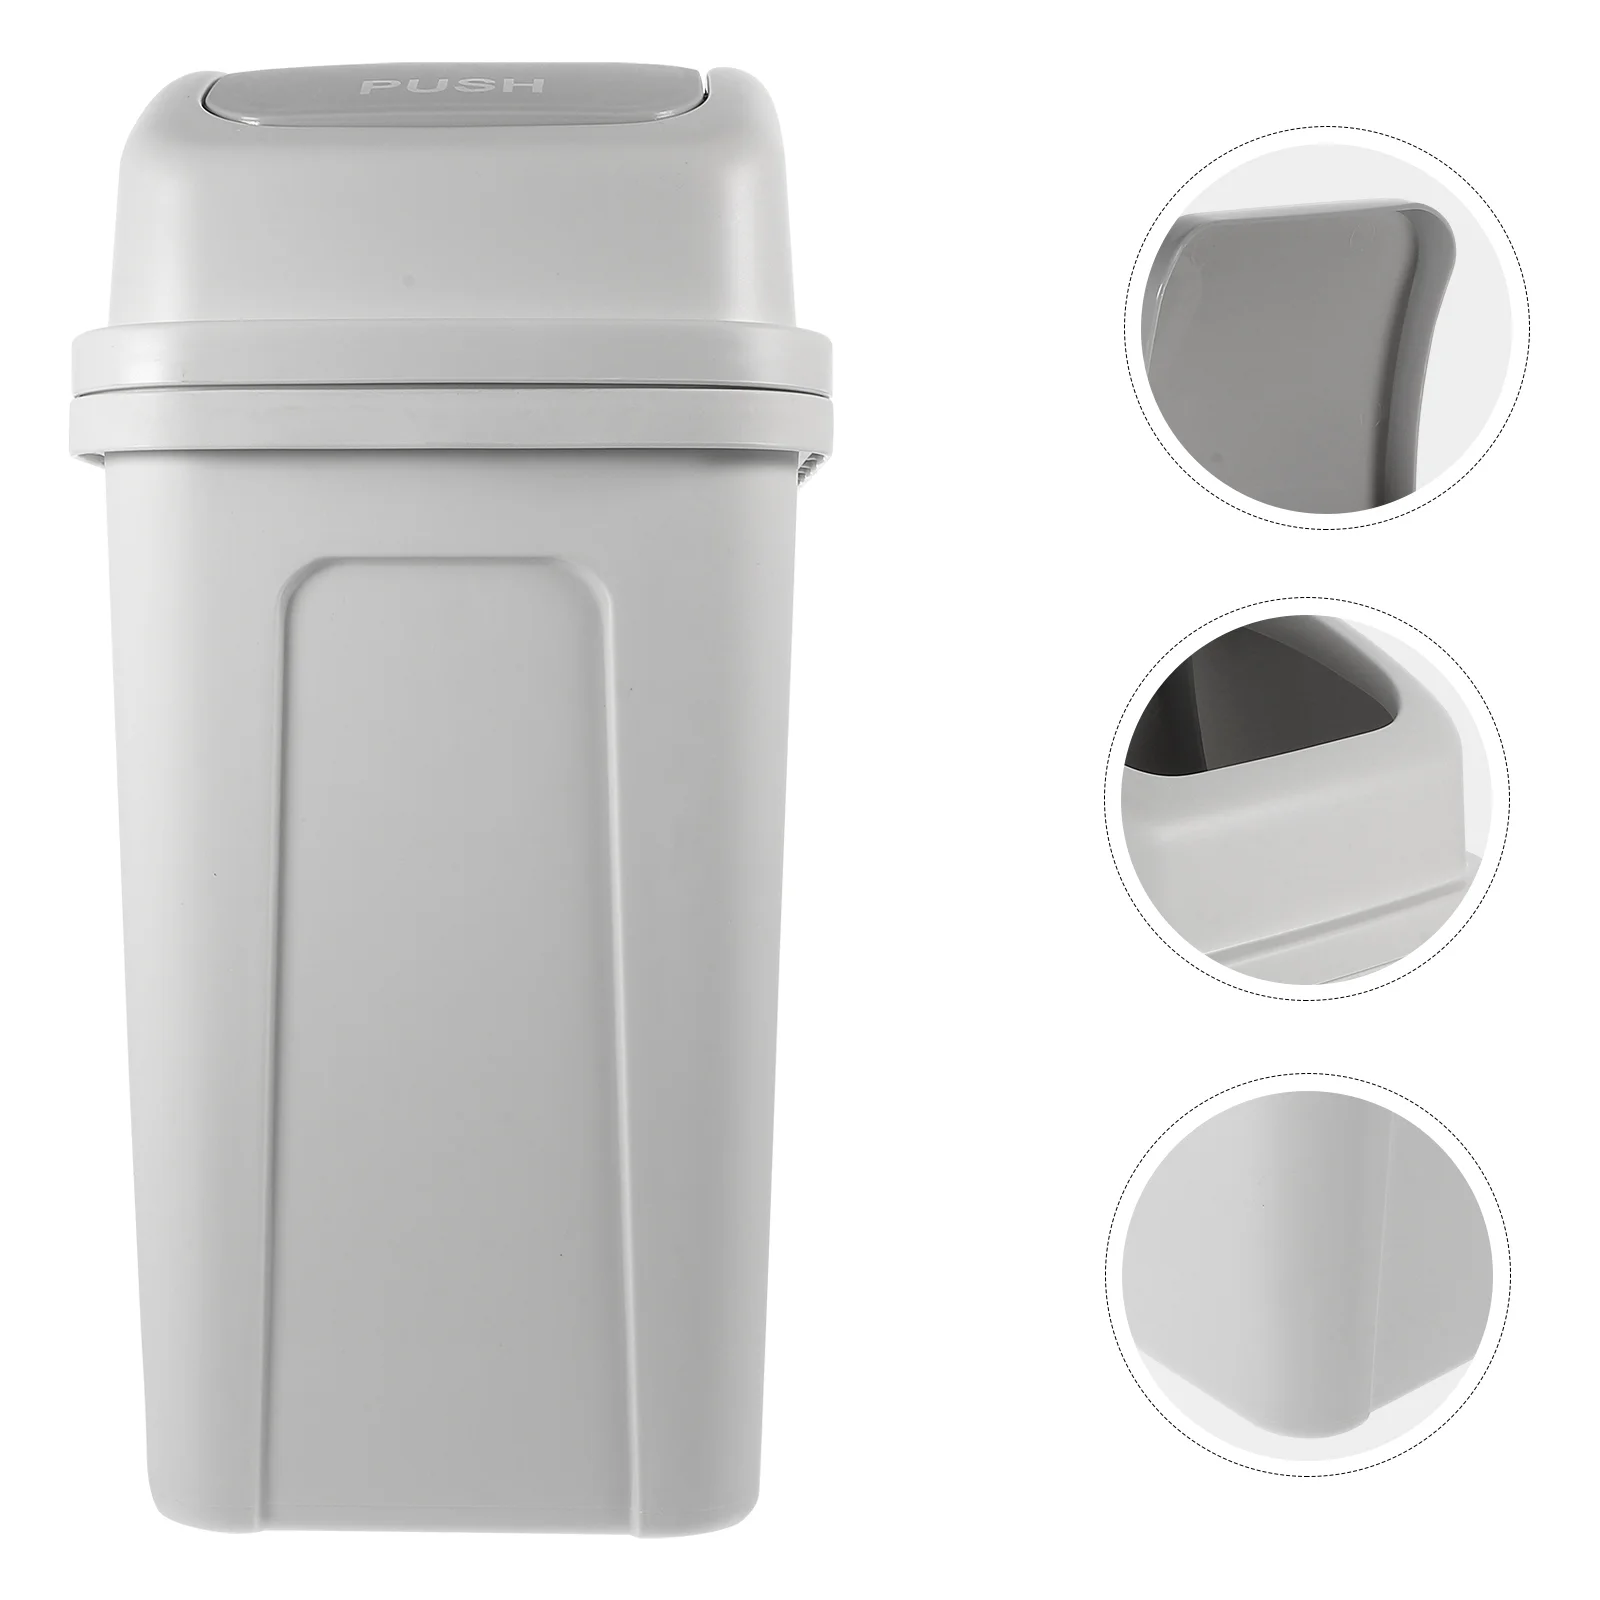 

Small Trash Can Lid 1.8 Gallon Thicken Plastic Garbage Can Slim Waste Bin Compact Rubbish Container Bucket Bathroom Kitchen